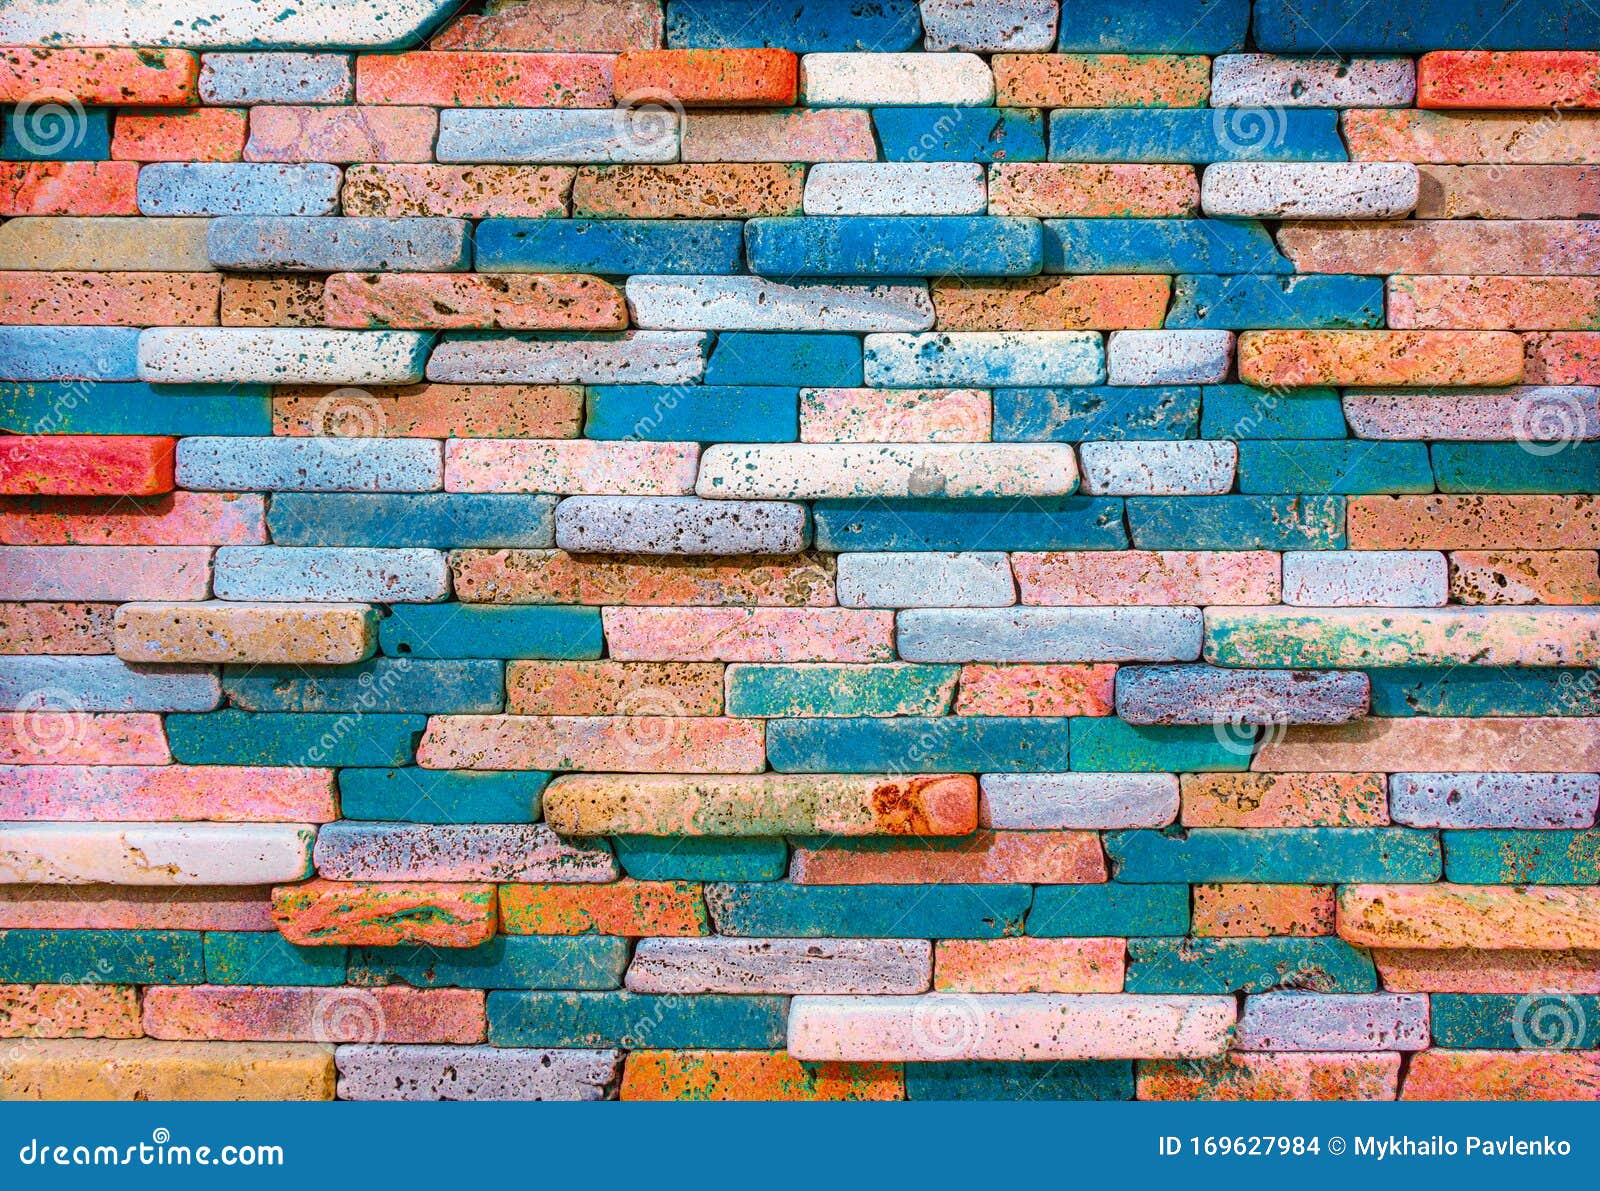 The Wall is Decorated with Red Sandstone Tiles. Stock Photo - Image of ...